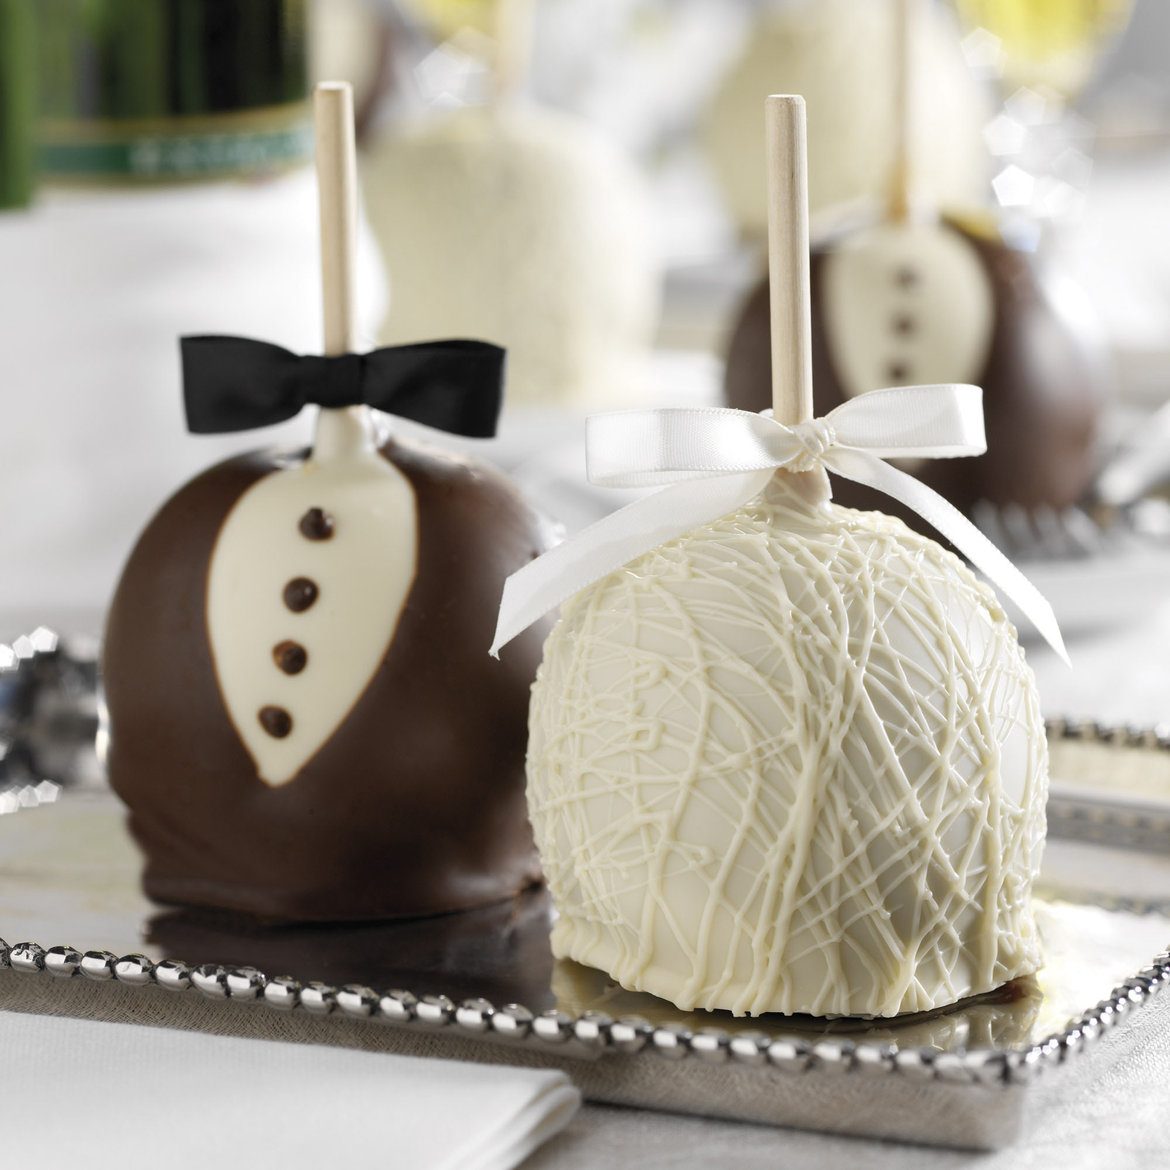 25 Edible Wedding Favors Your Guests Won't Leave Behind